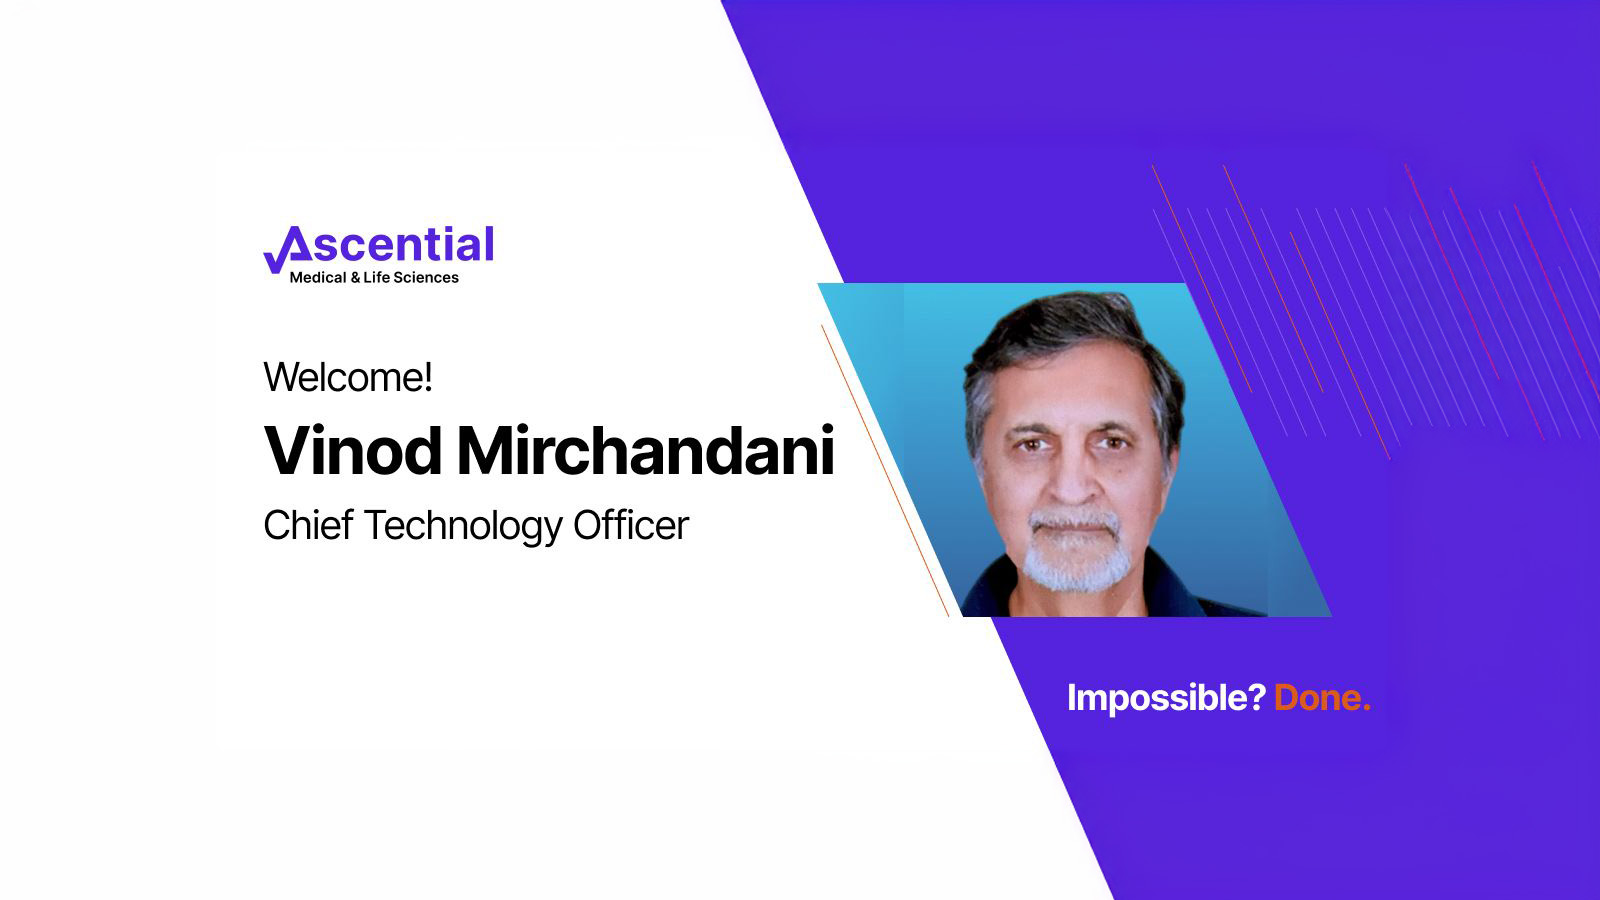 Ascential Medical & Life Sciences Appoints Vinod Mirchandani as Chief Technology Officer